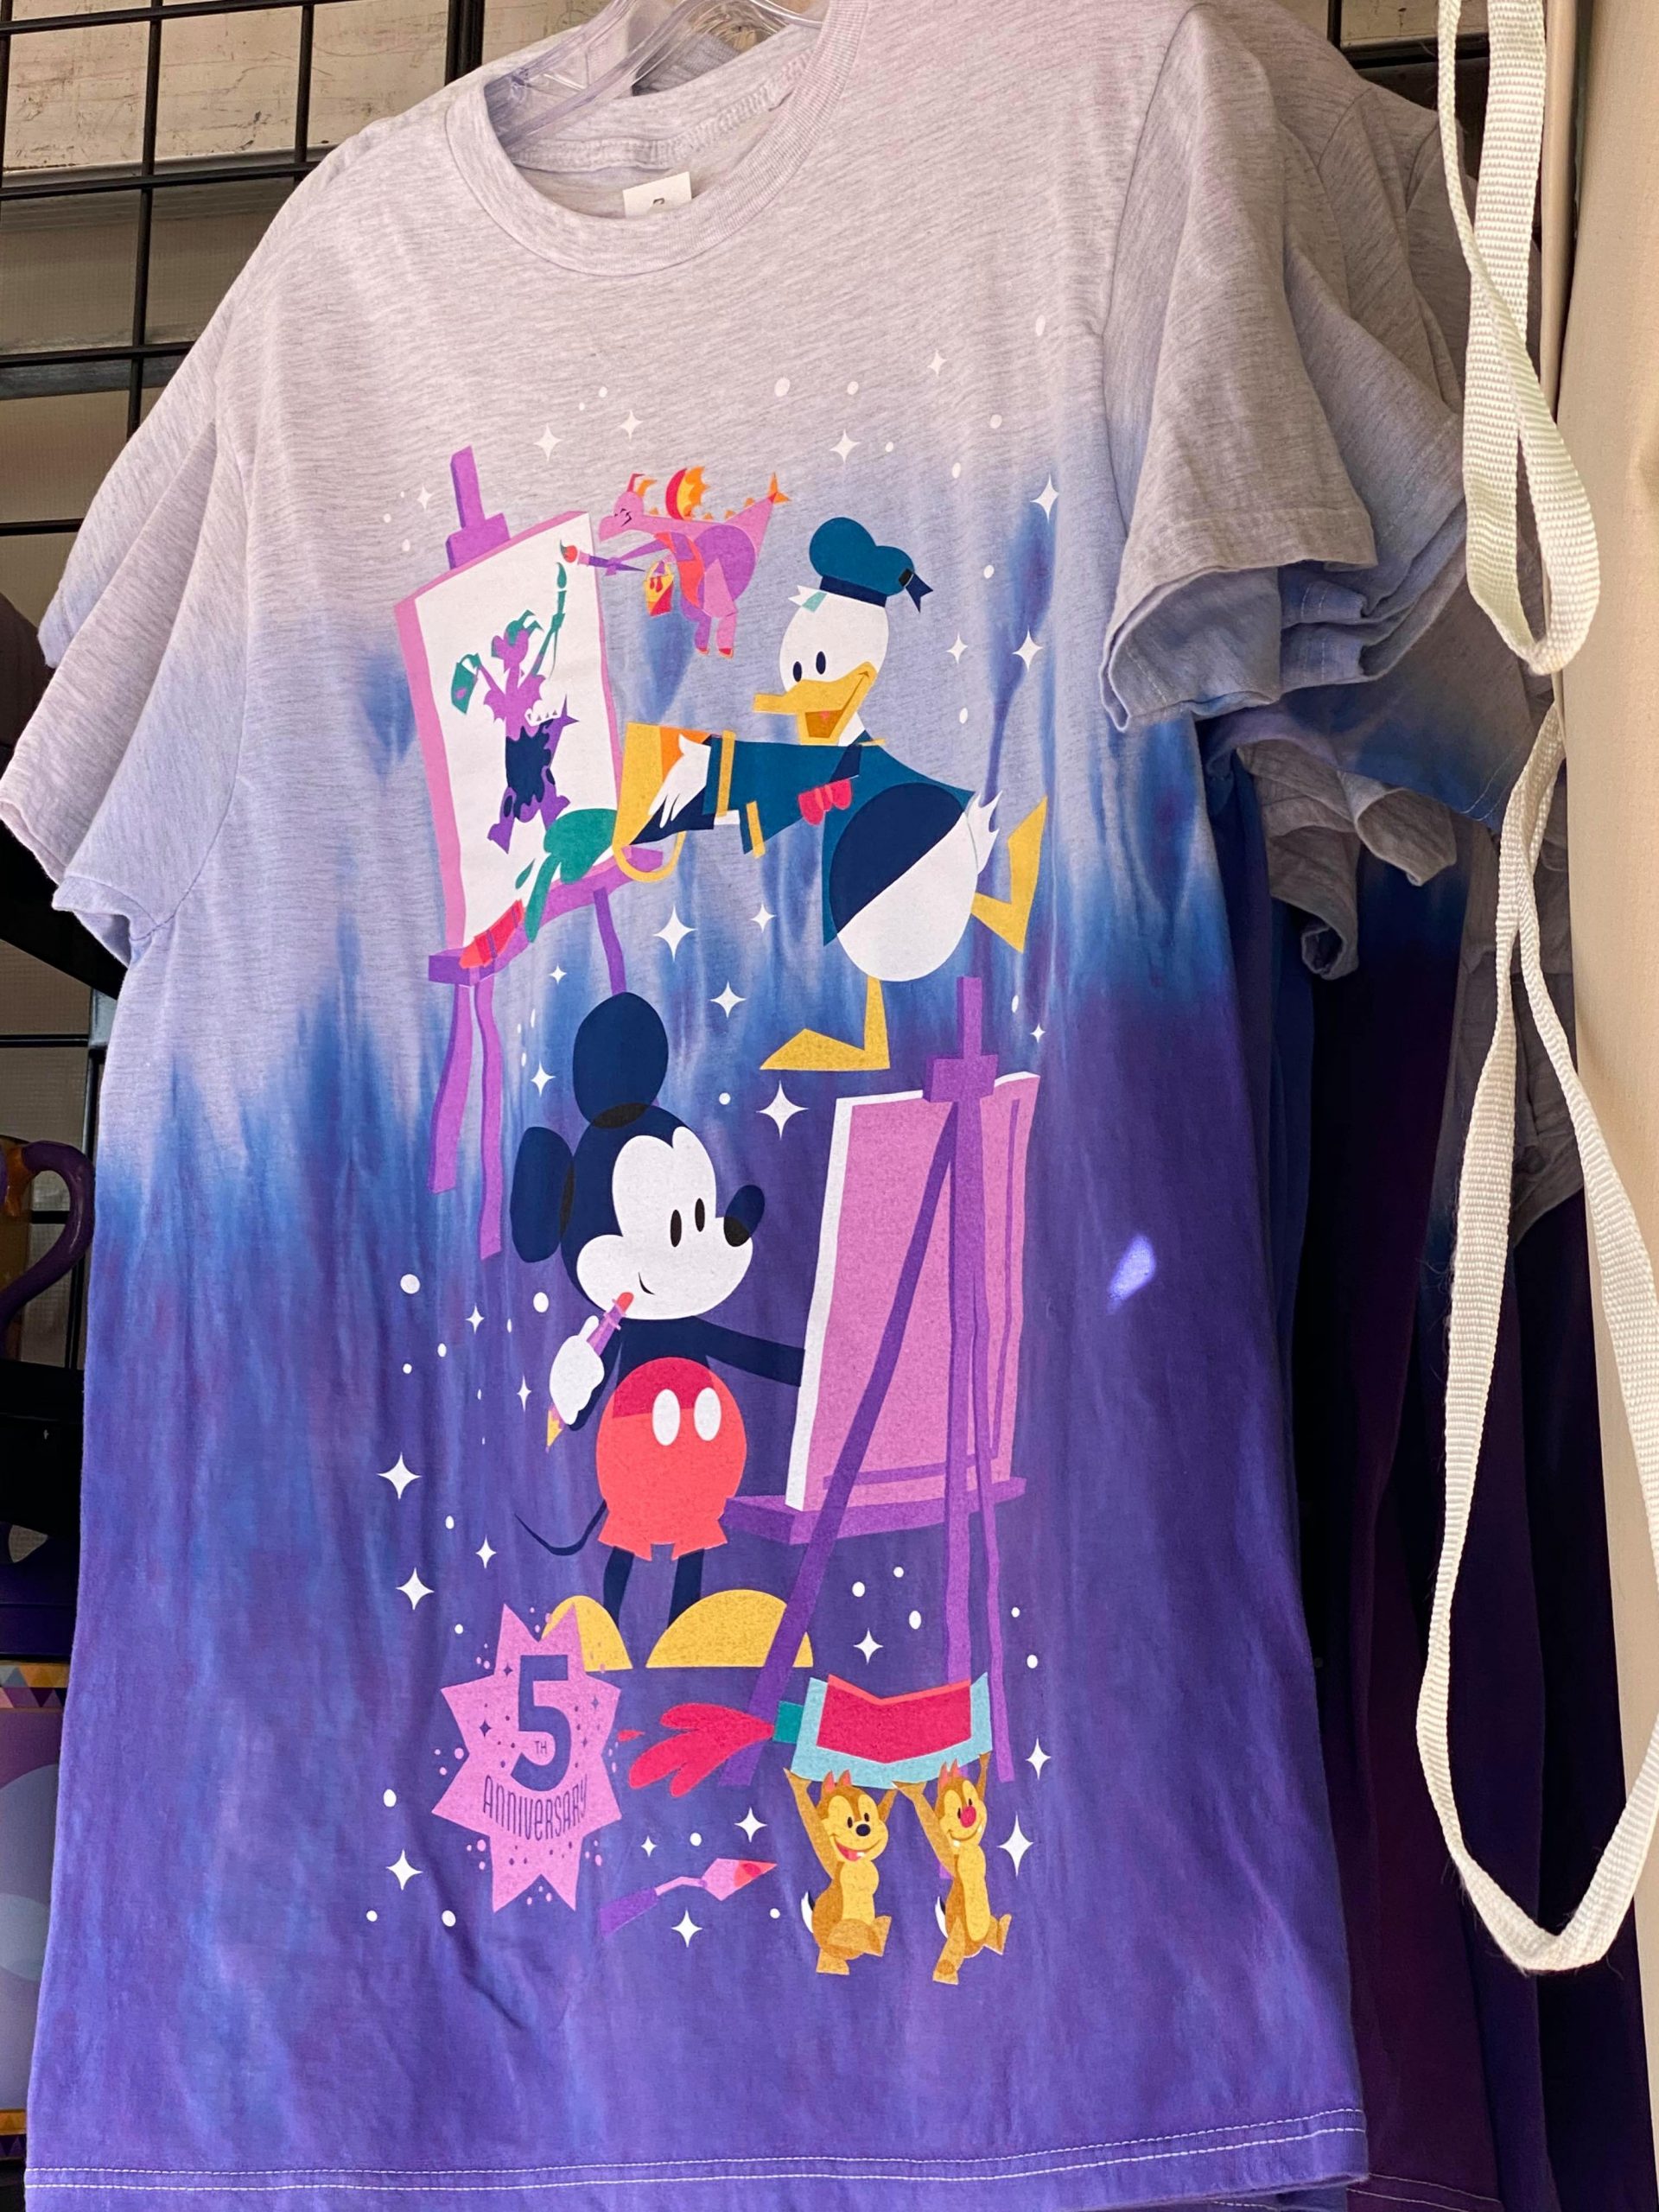 New Festival of the Arts TShirt Featuring Fun Disney Characters